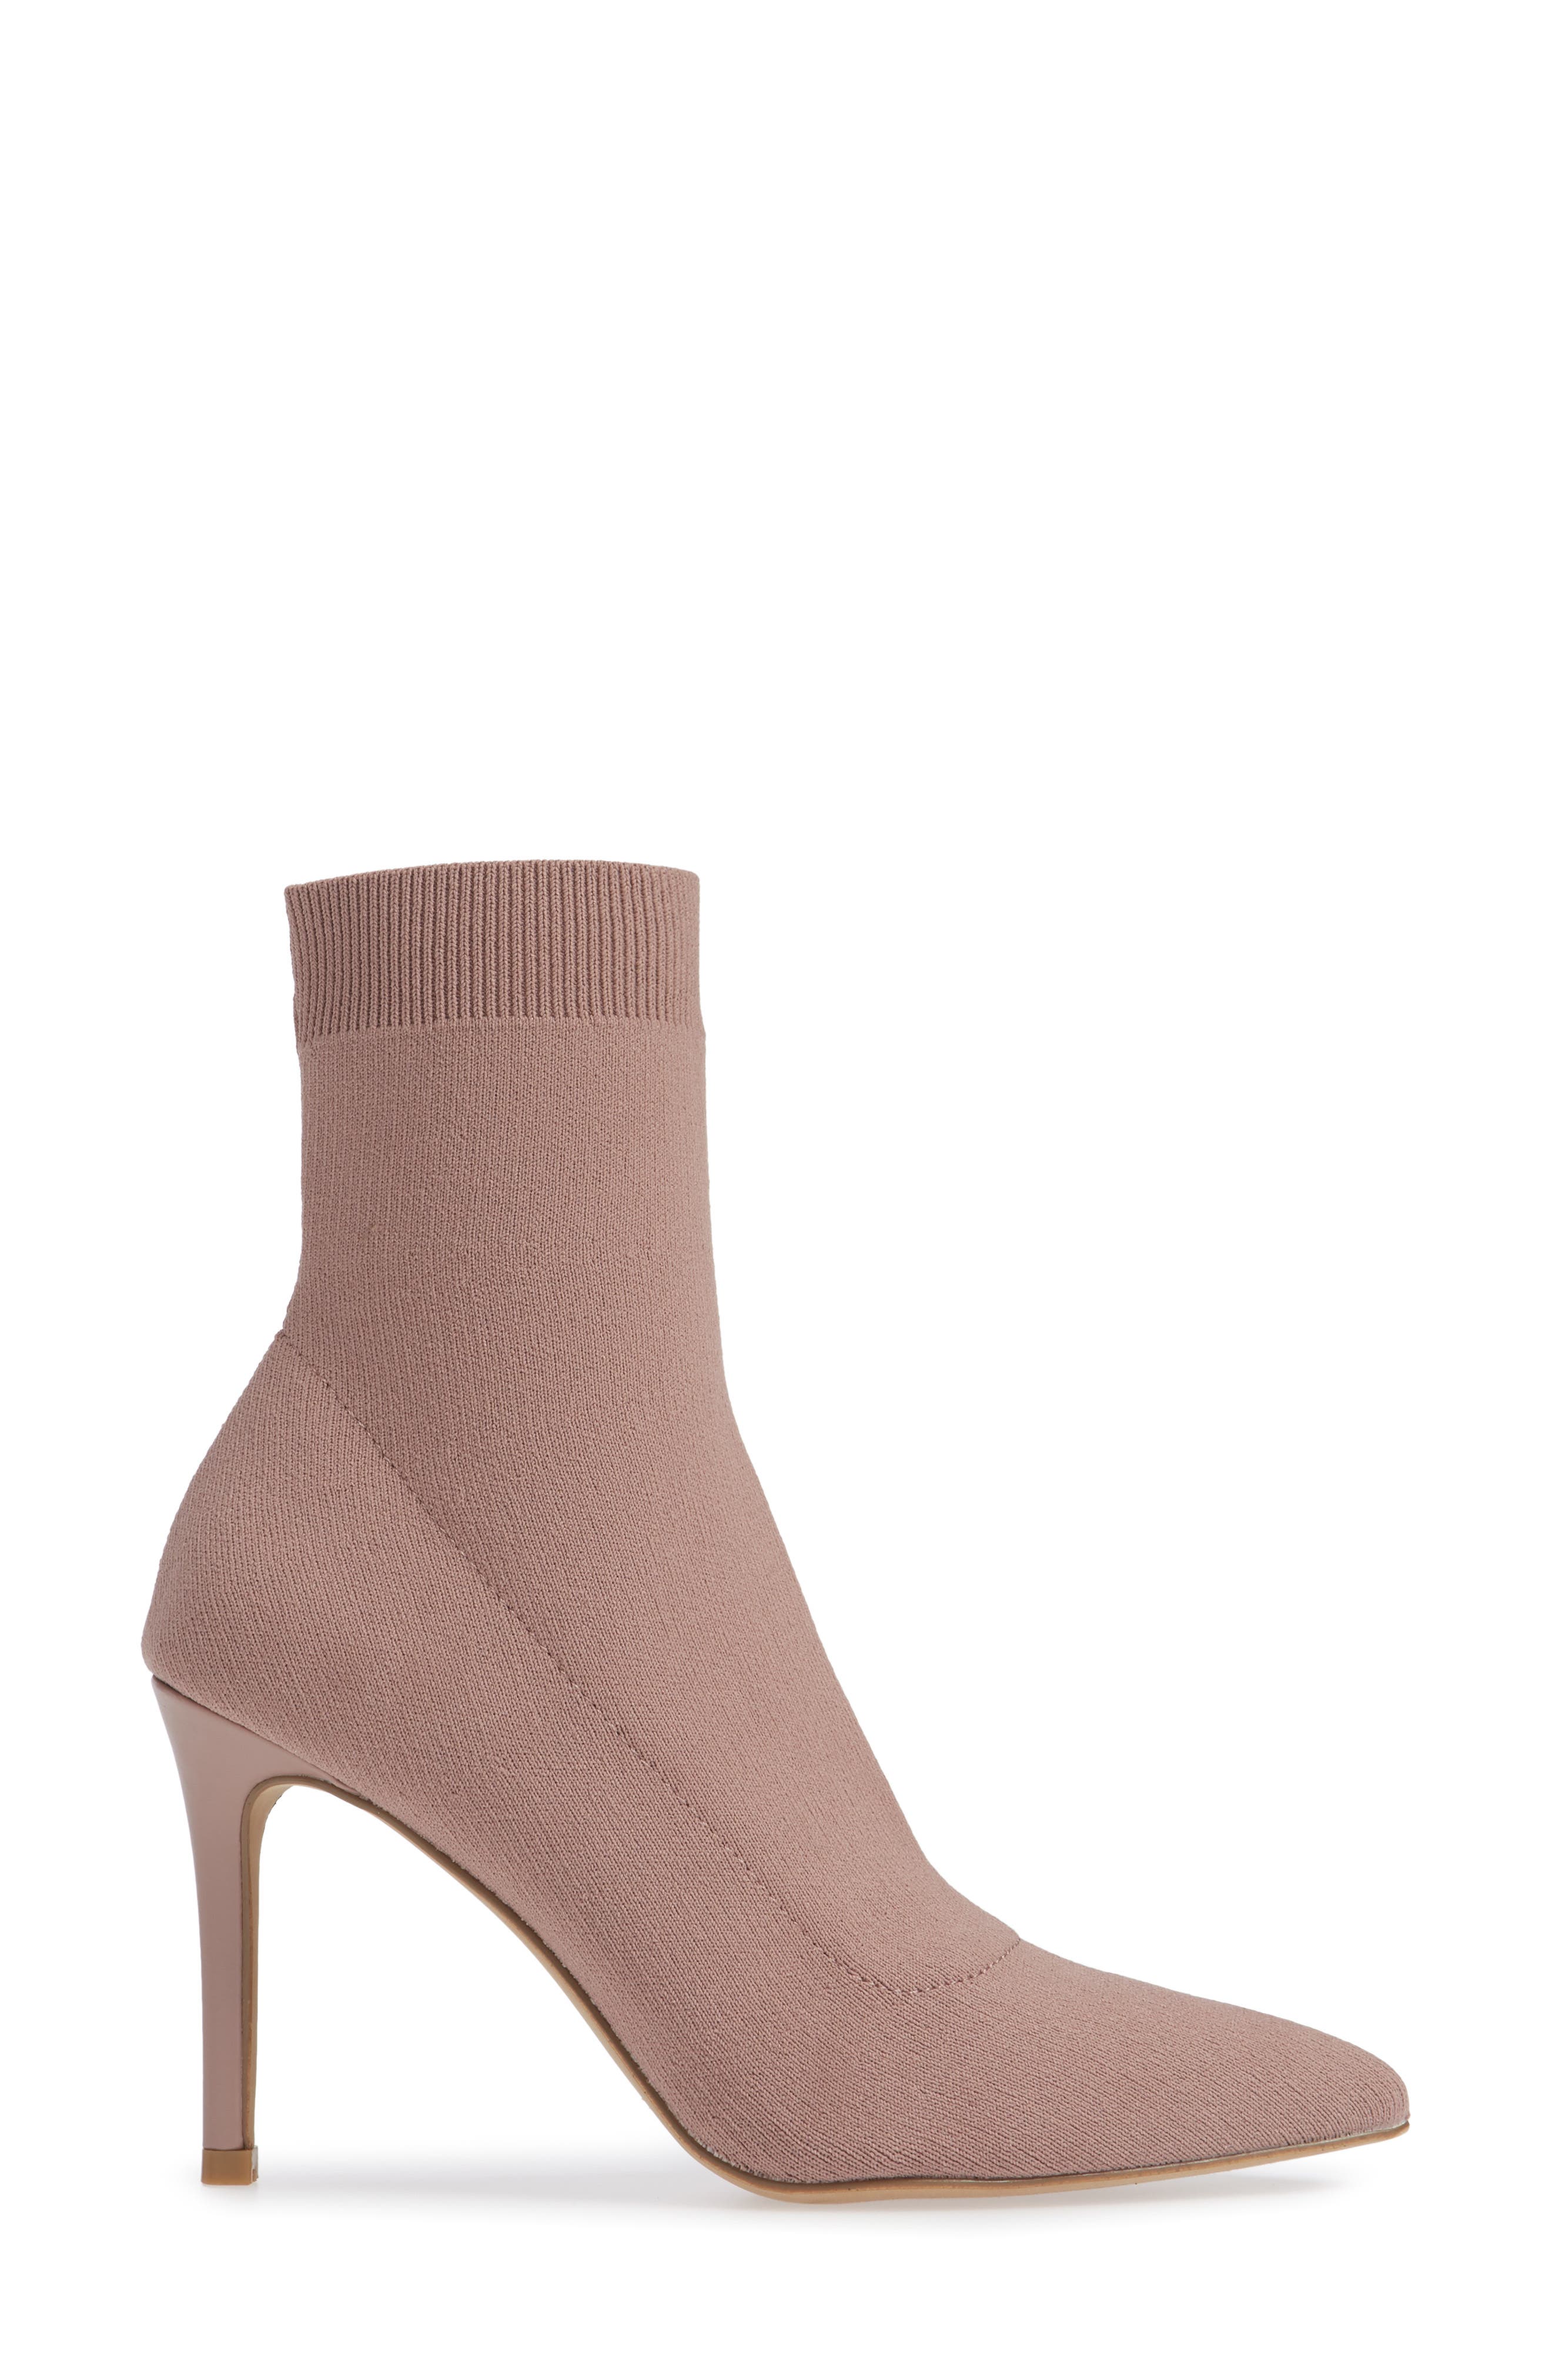 steve madden claire booties